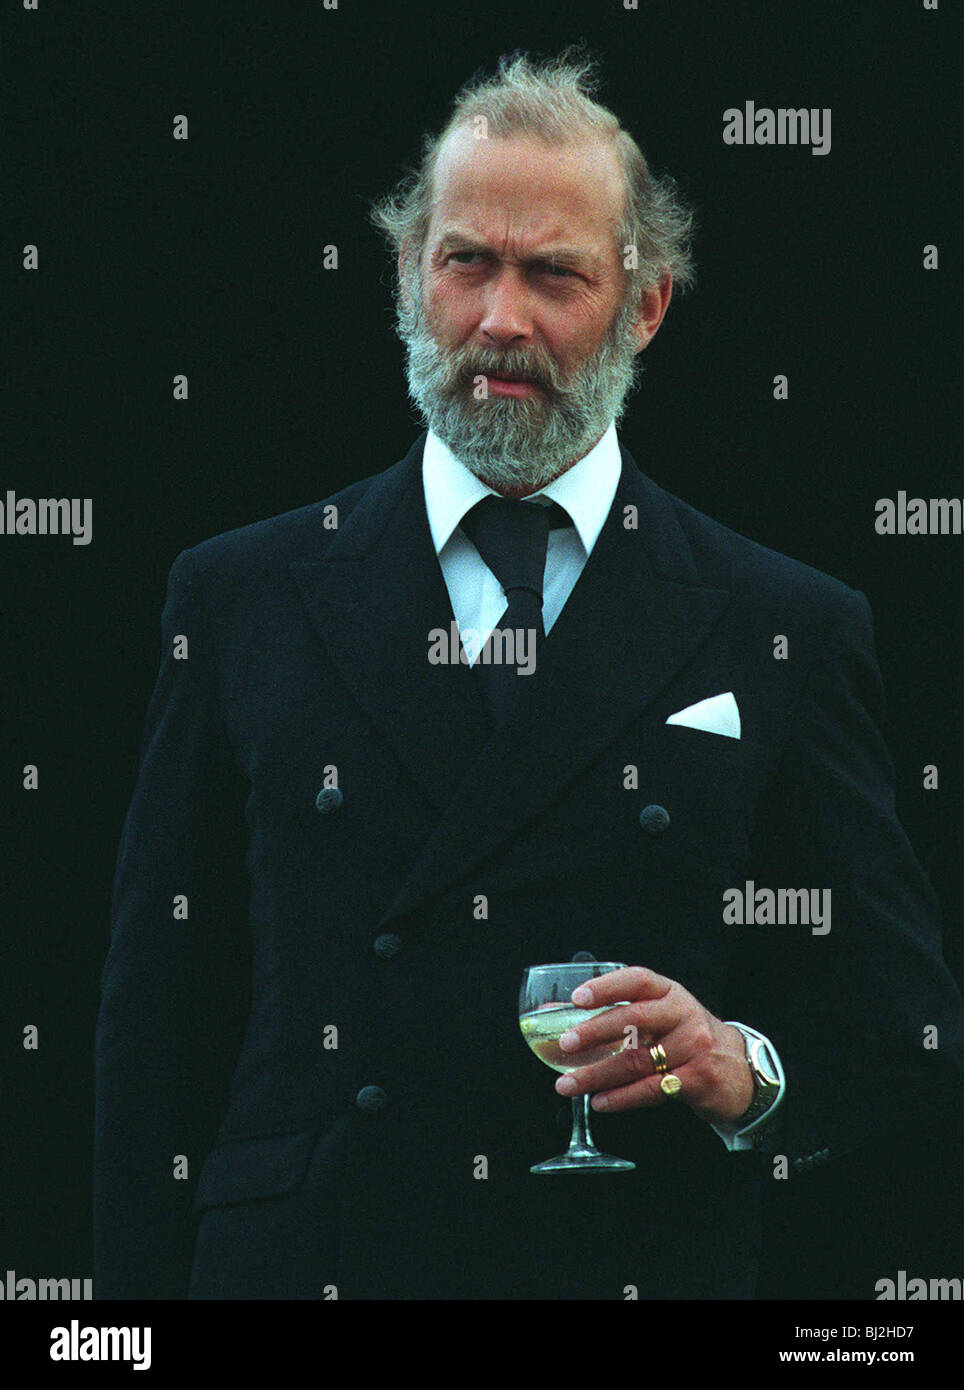 PRINCE MICHAEL OF KENT ROYAL FAMILY 09 August 1993 Stock Photo